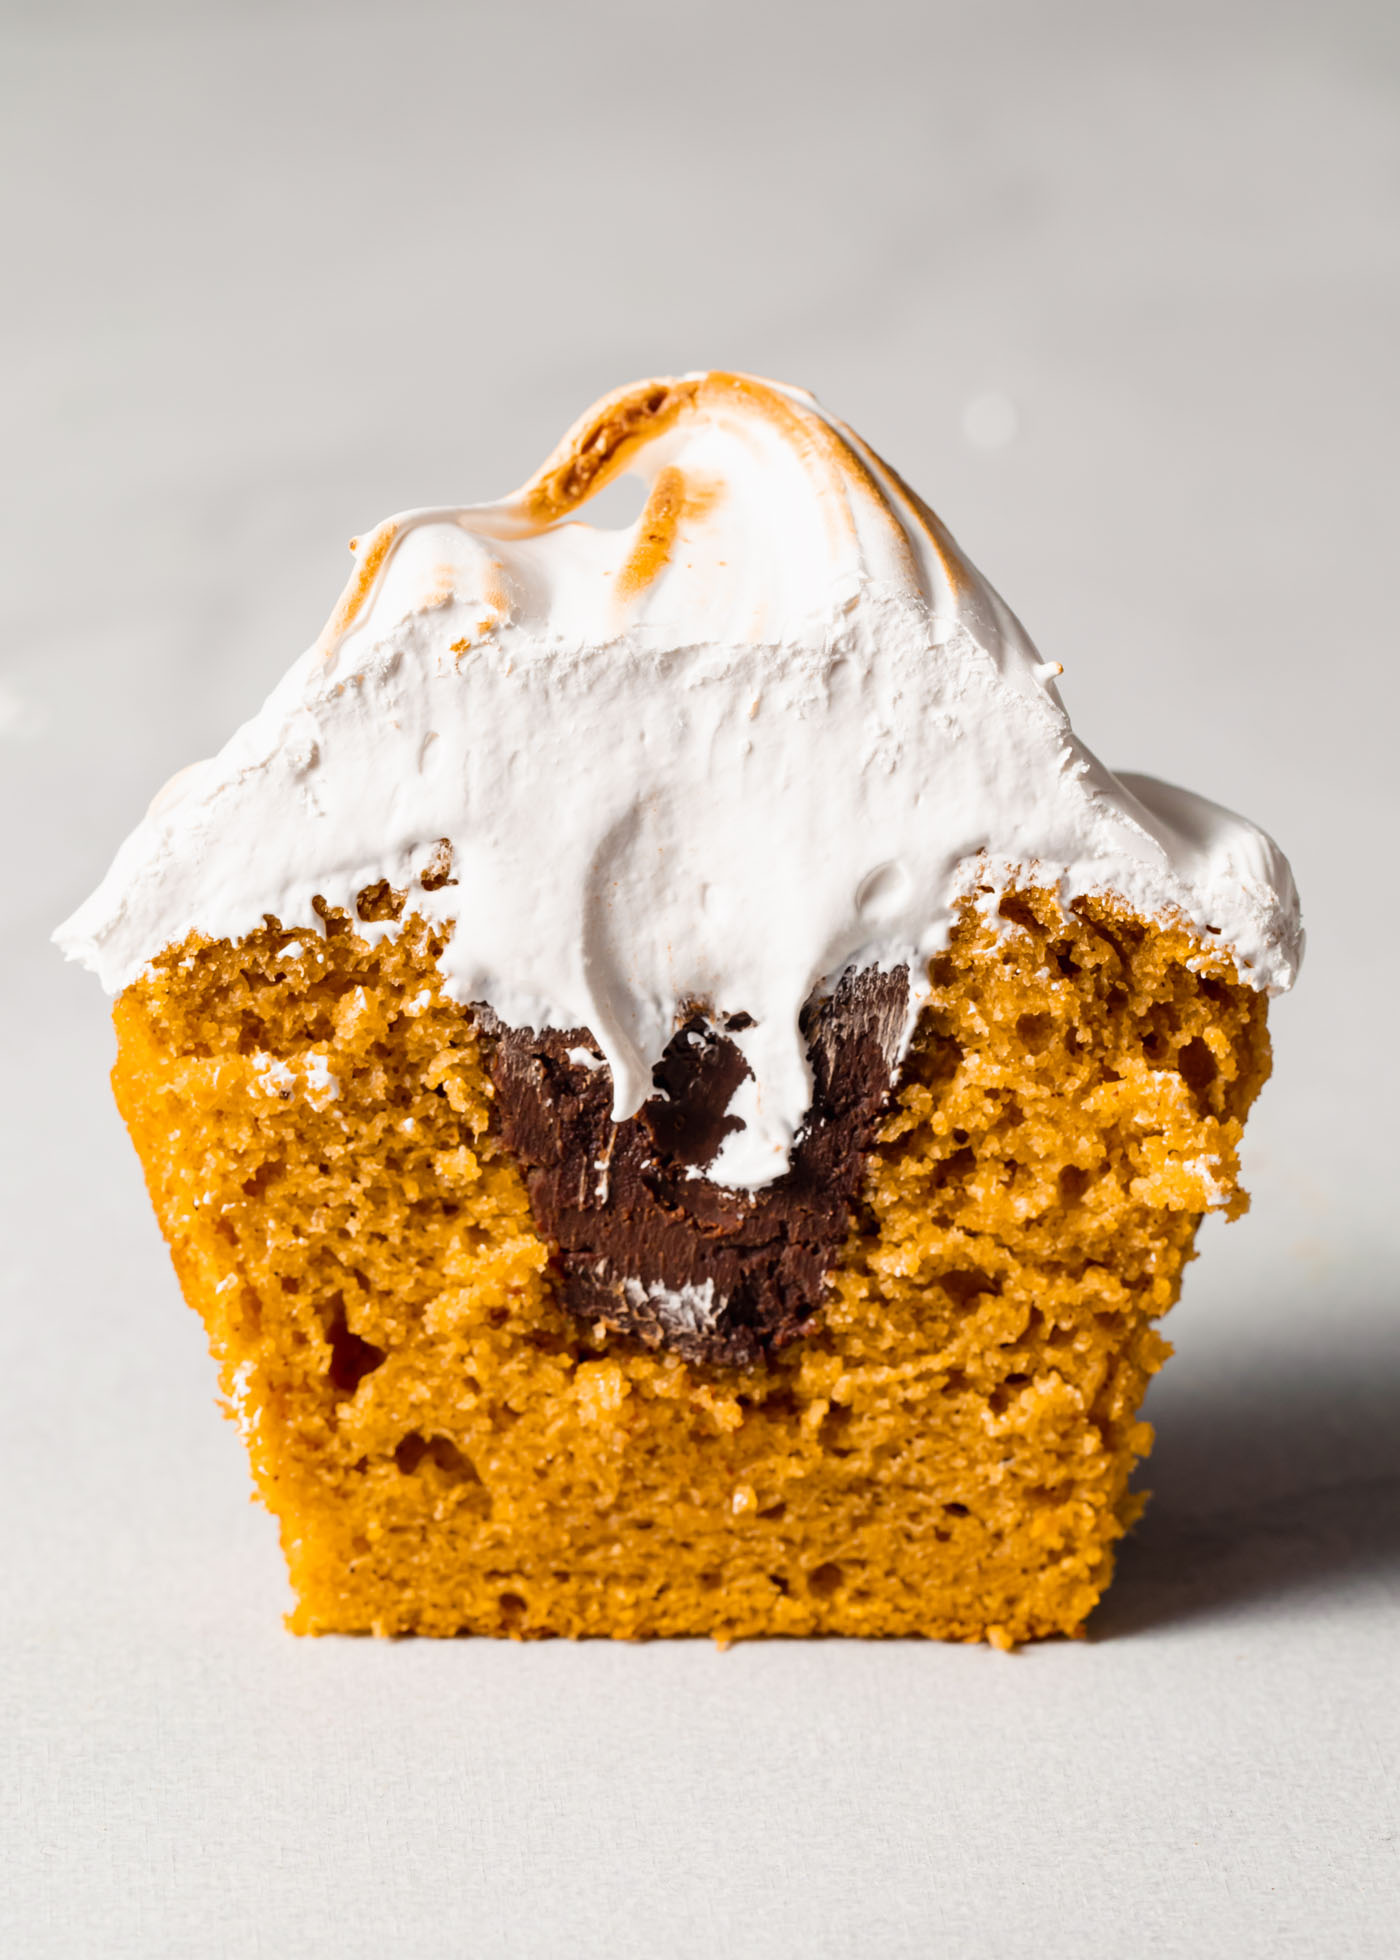 A pumpkin s'mores cupcake that has been sliced open to reveal the chocolate filling